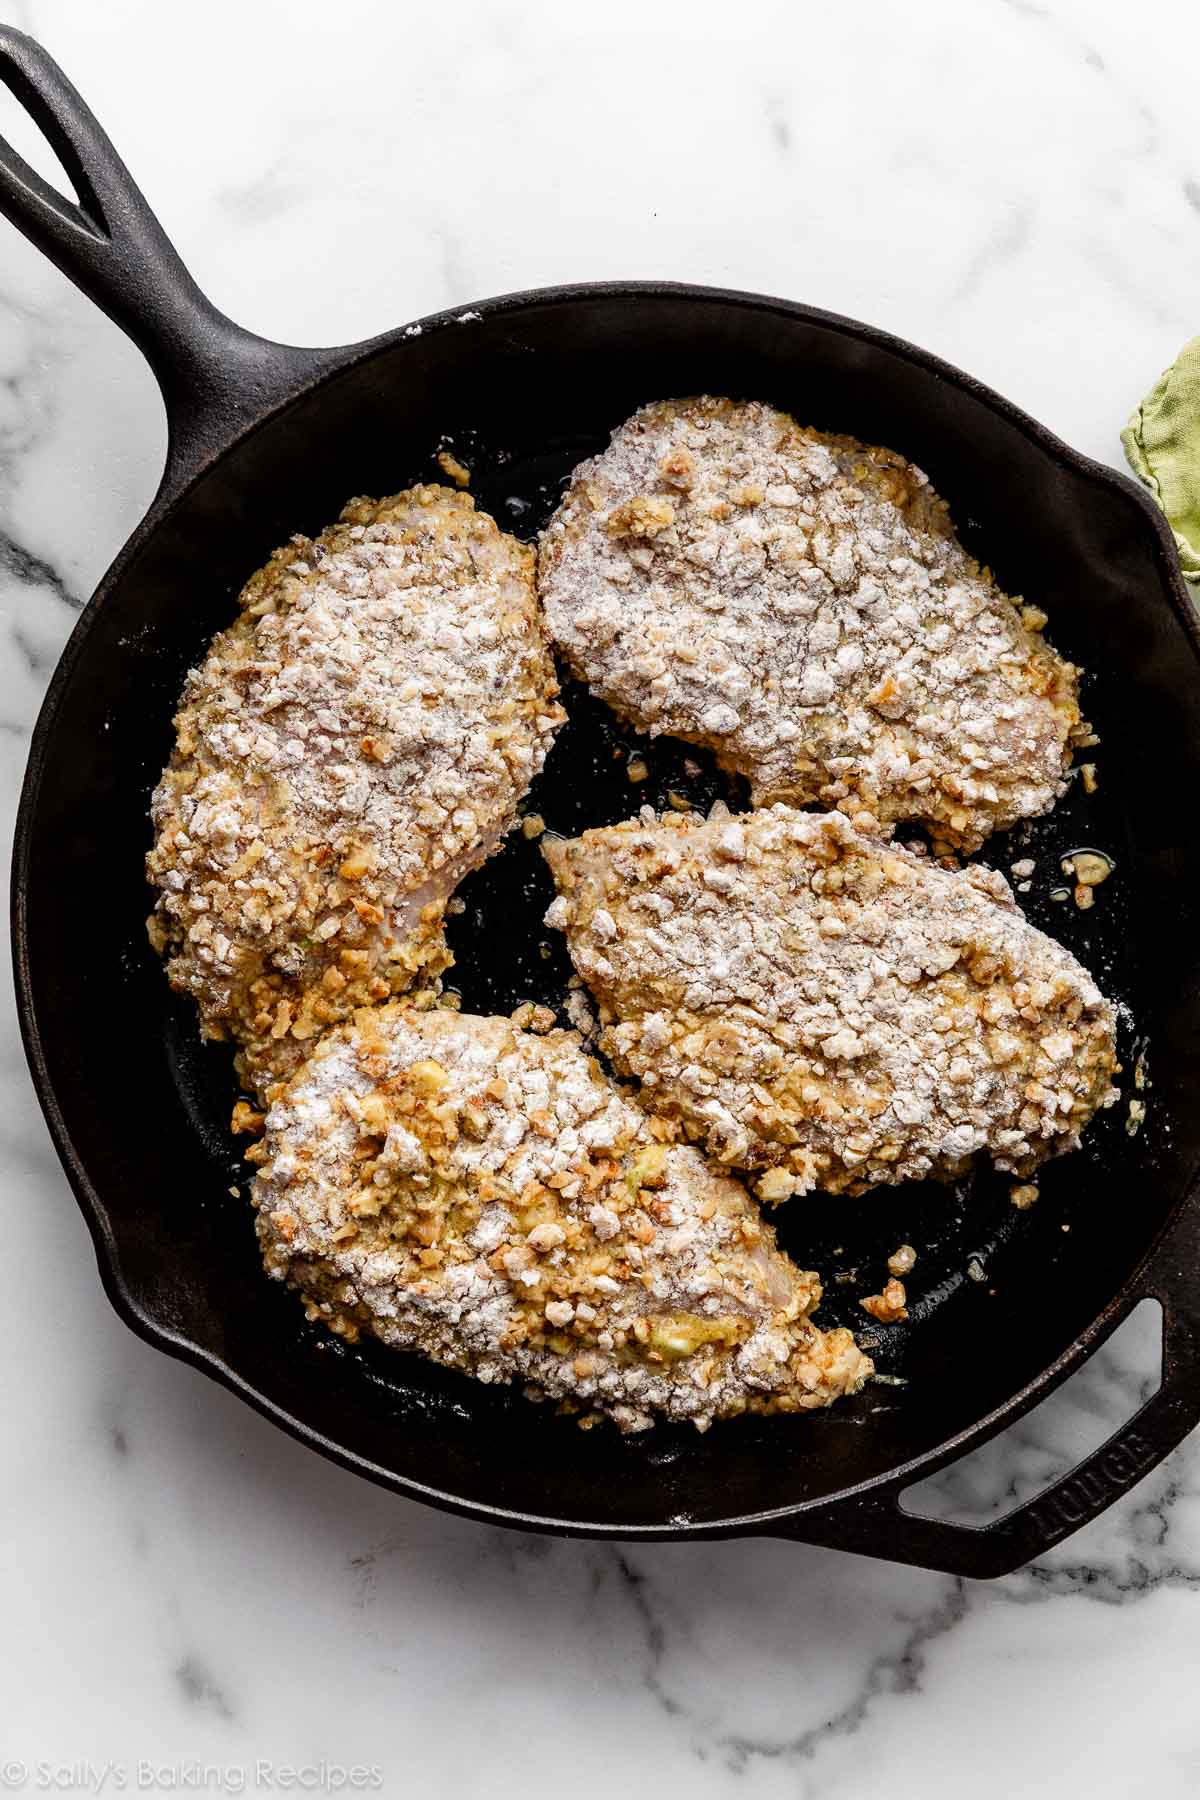 coated chicken in cast iron skillet.